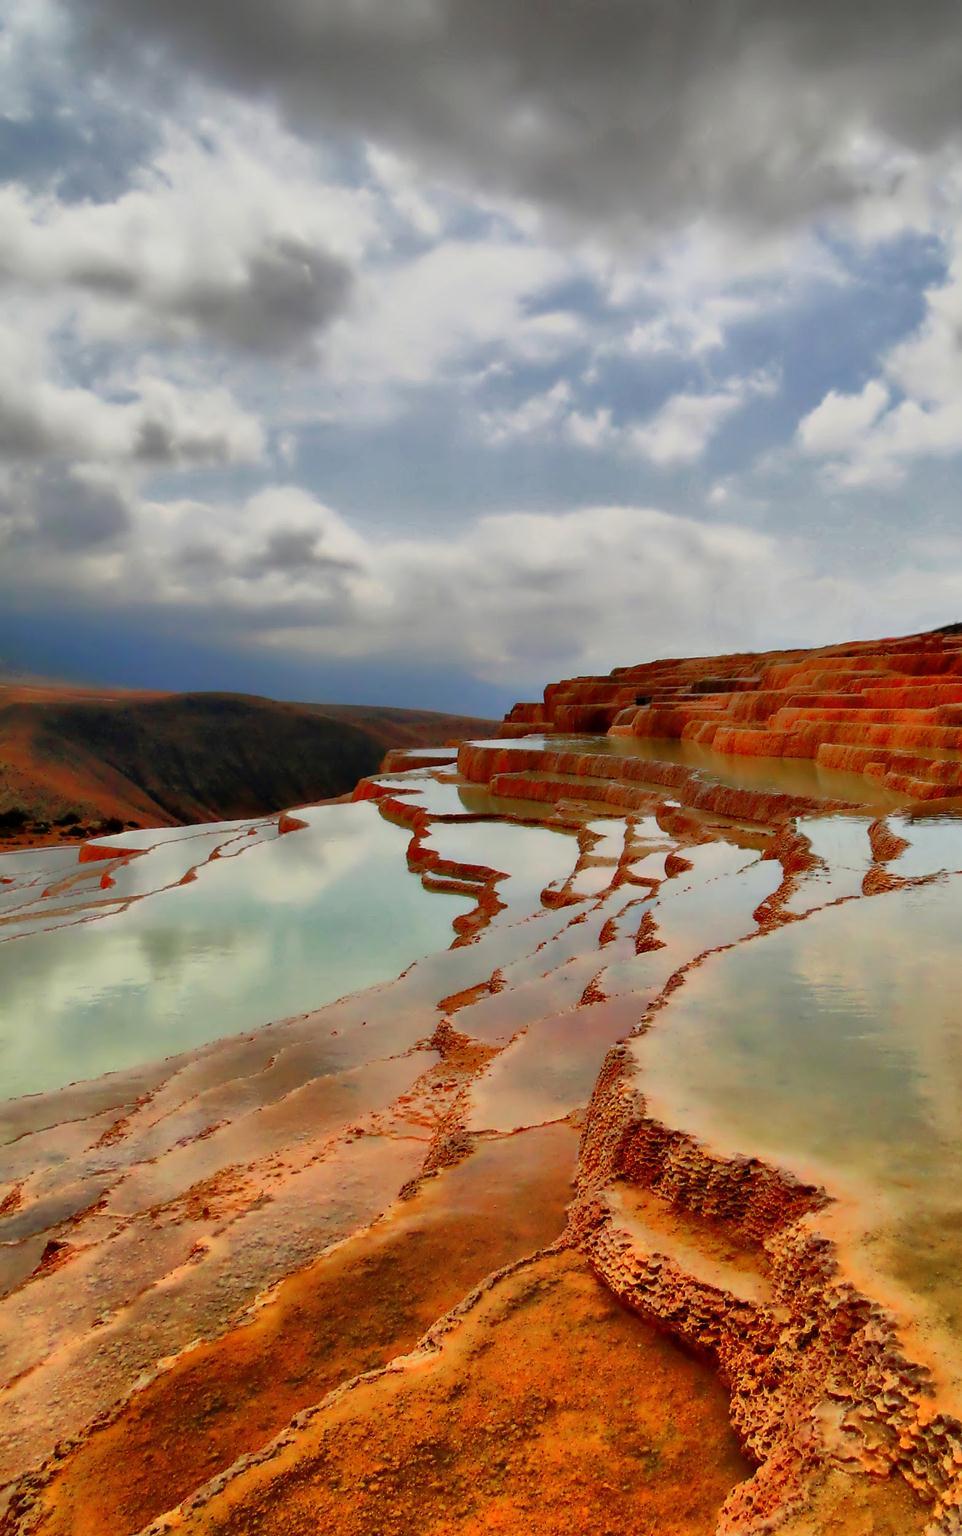 It is composed of many steppes colored red due to the presence of iron. It was formed by water flowing from two springs.